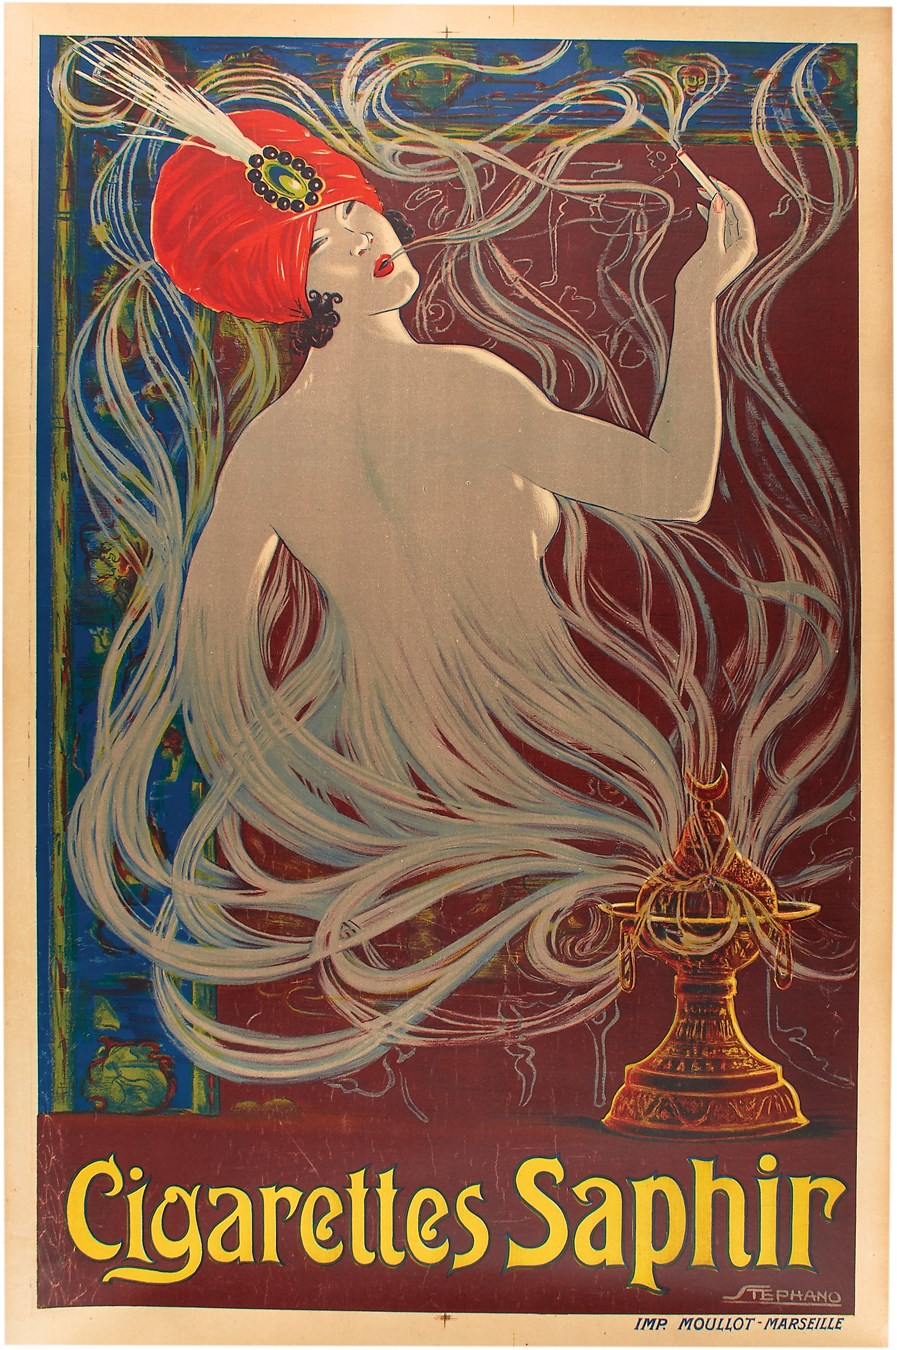 - Art Nouveau Turn of the Century Saphir Cigarettes French Art Poster by Stefano